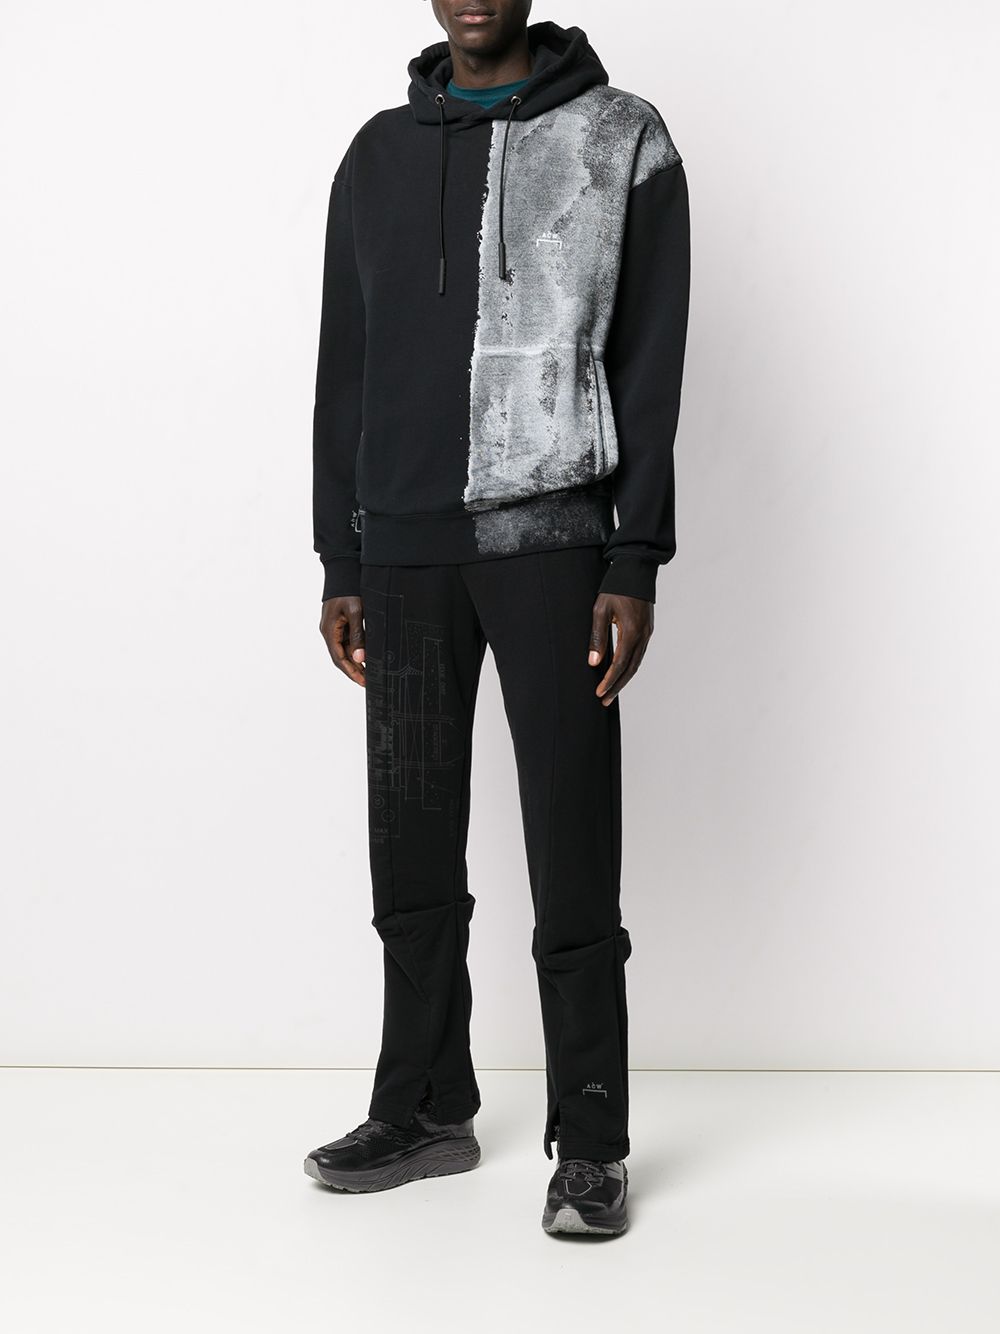 A-COLD-WALL* Painted Panel Hoodie - Farfetch